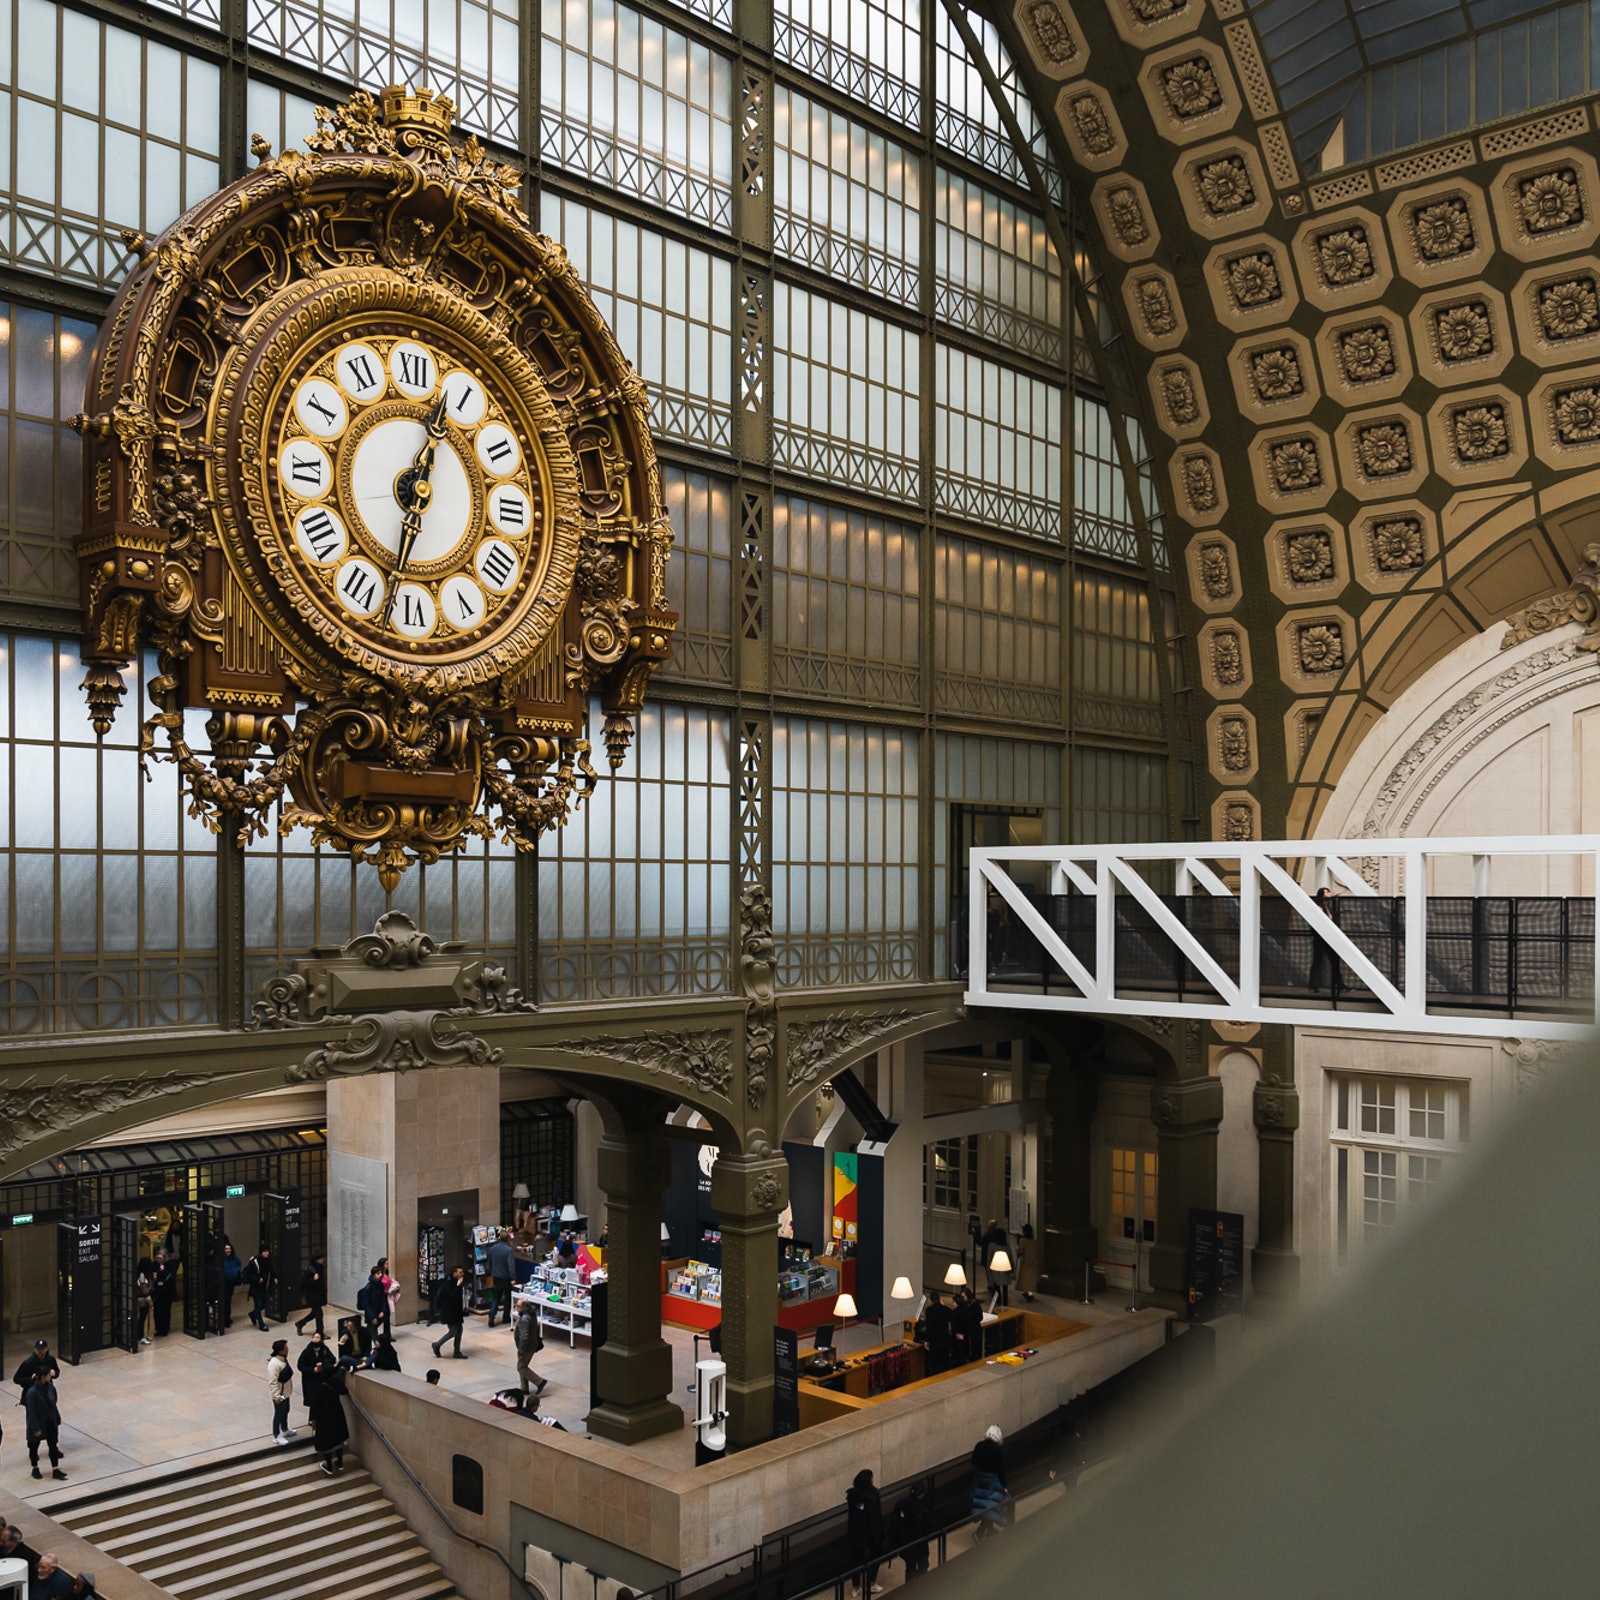 Musée d'Orsay: Dedicated Entrance in France